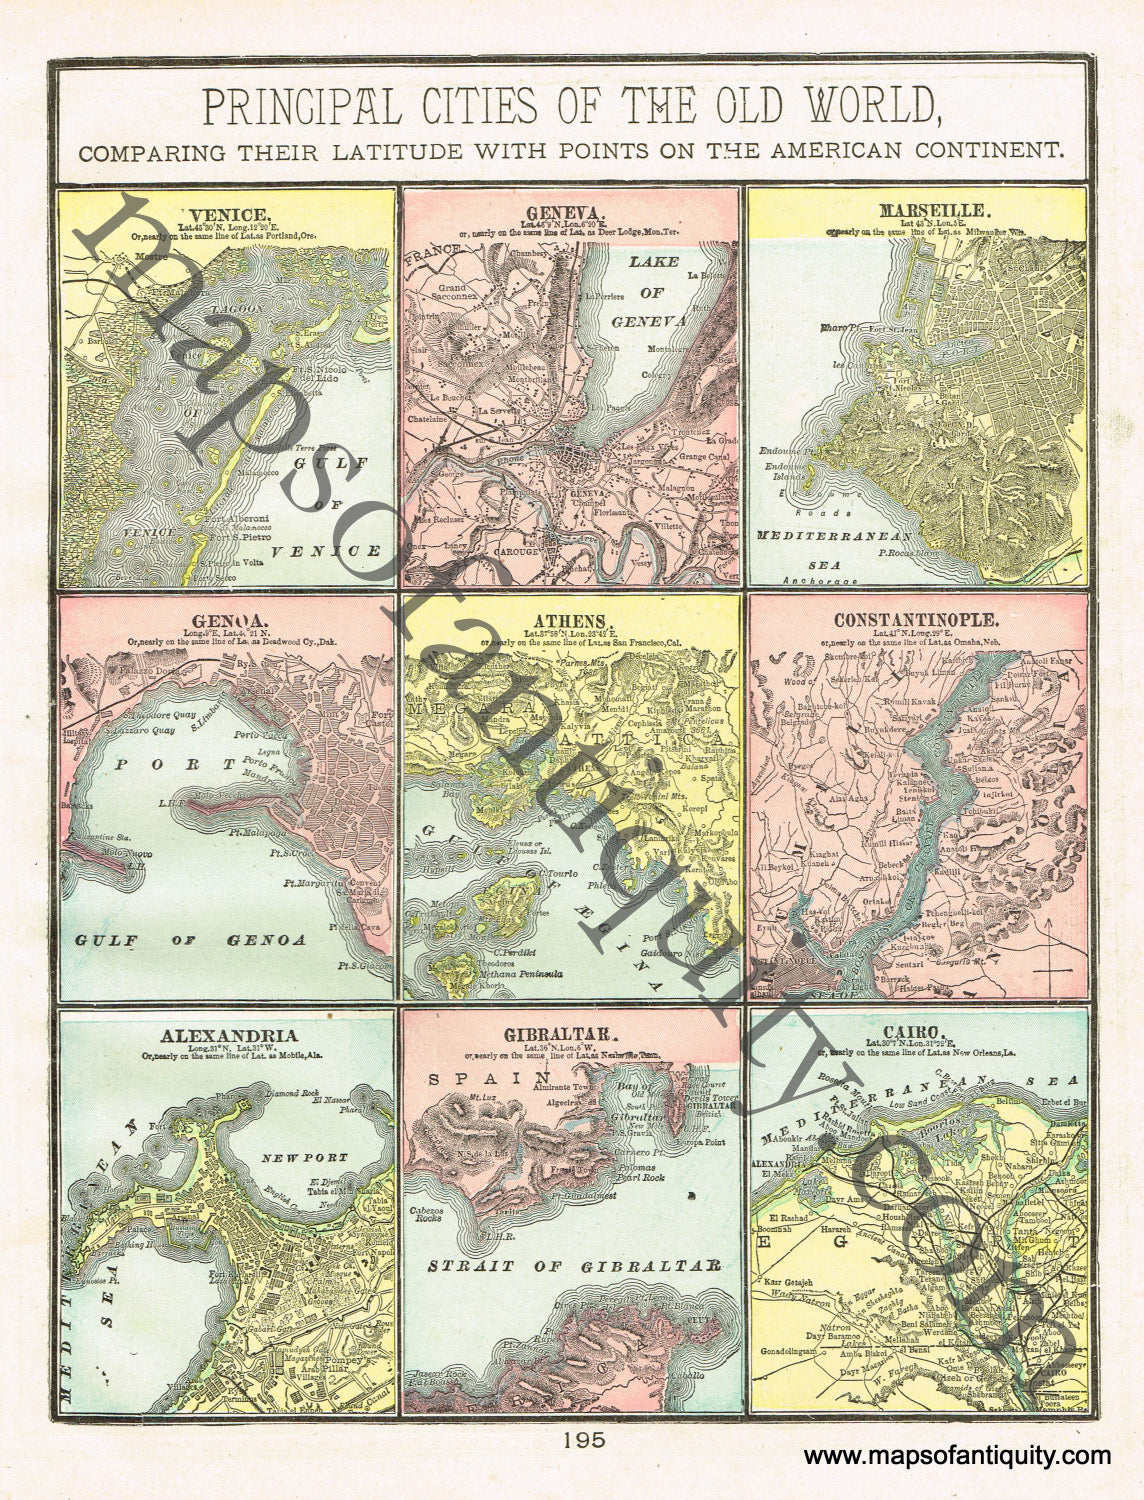 Antique-Printed-Color-Map-Principal-Cities-of-The-Old-World-Comparing-Their-Latitude-with-Points-on-The-American-Continent-verso:-Turkish-Empire-in-Europe-and-Asia-Towns-and-City-Maps-Europe-Turkey-1900-Cram-Maps-Of-Antiquity